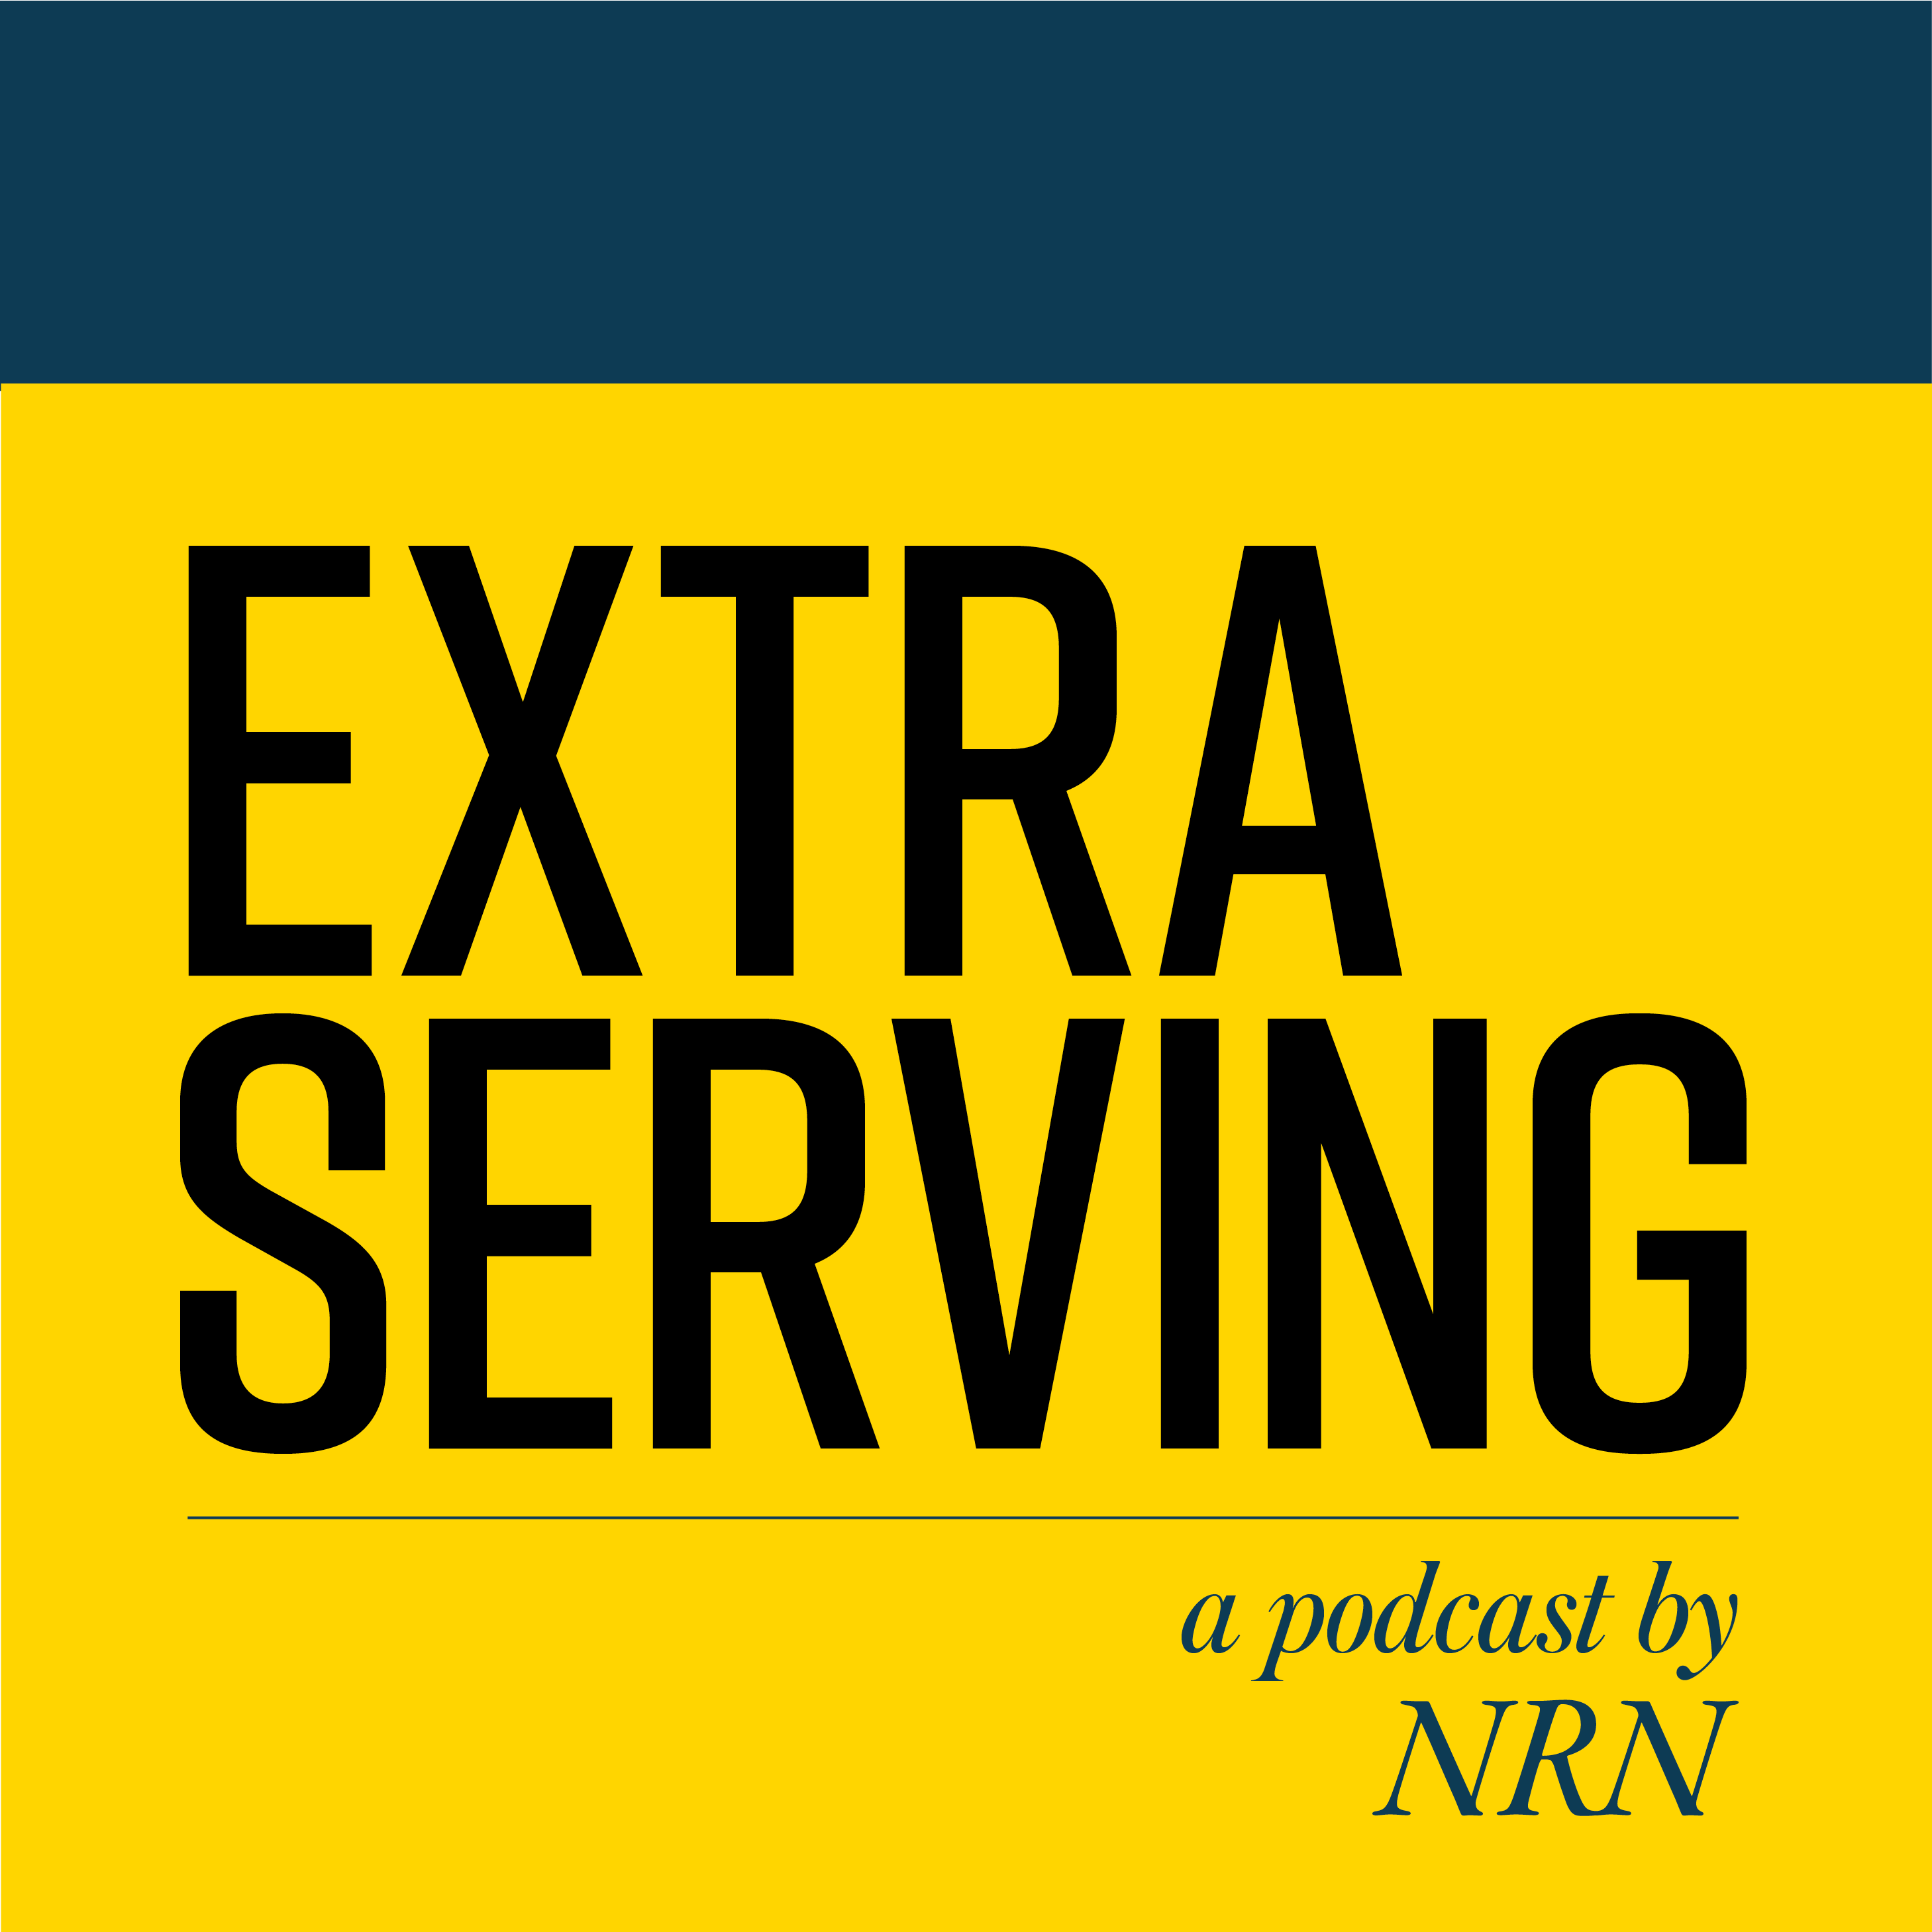 NRN editors discuss inflation, the 2-year COVID anniversary, Howard Schultz’s stance on unions